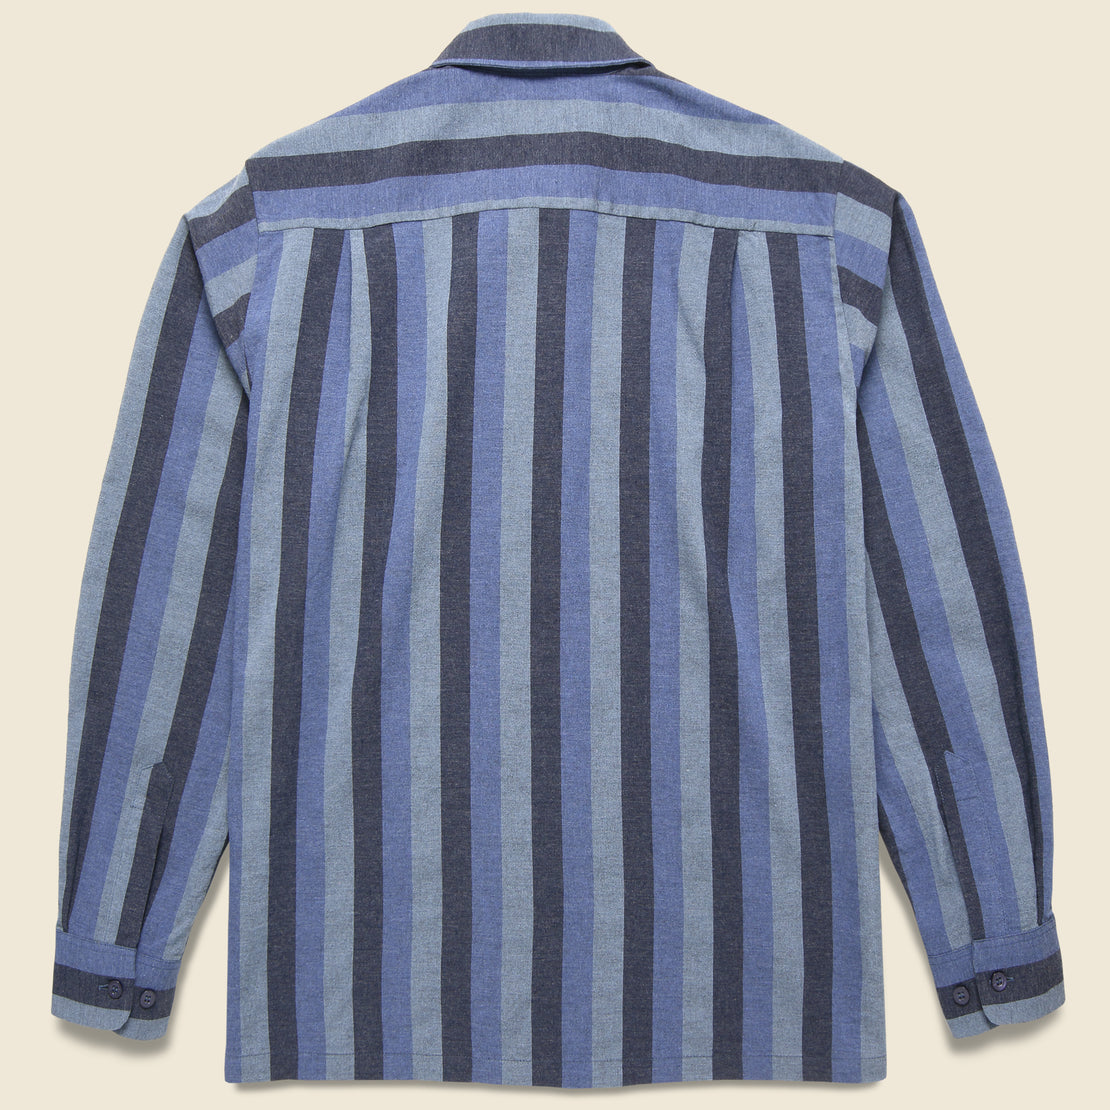 Sportswear Shirt - Tonal Blues - Levis Vintage Clothing - STAG Provisions - Tops - L/S Woven - Stripe